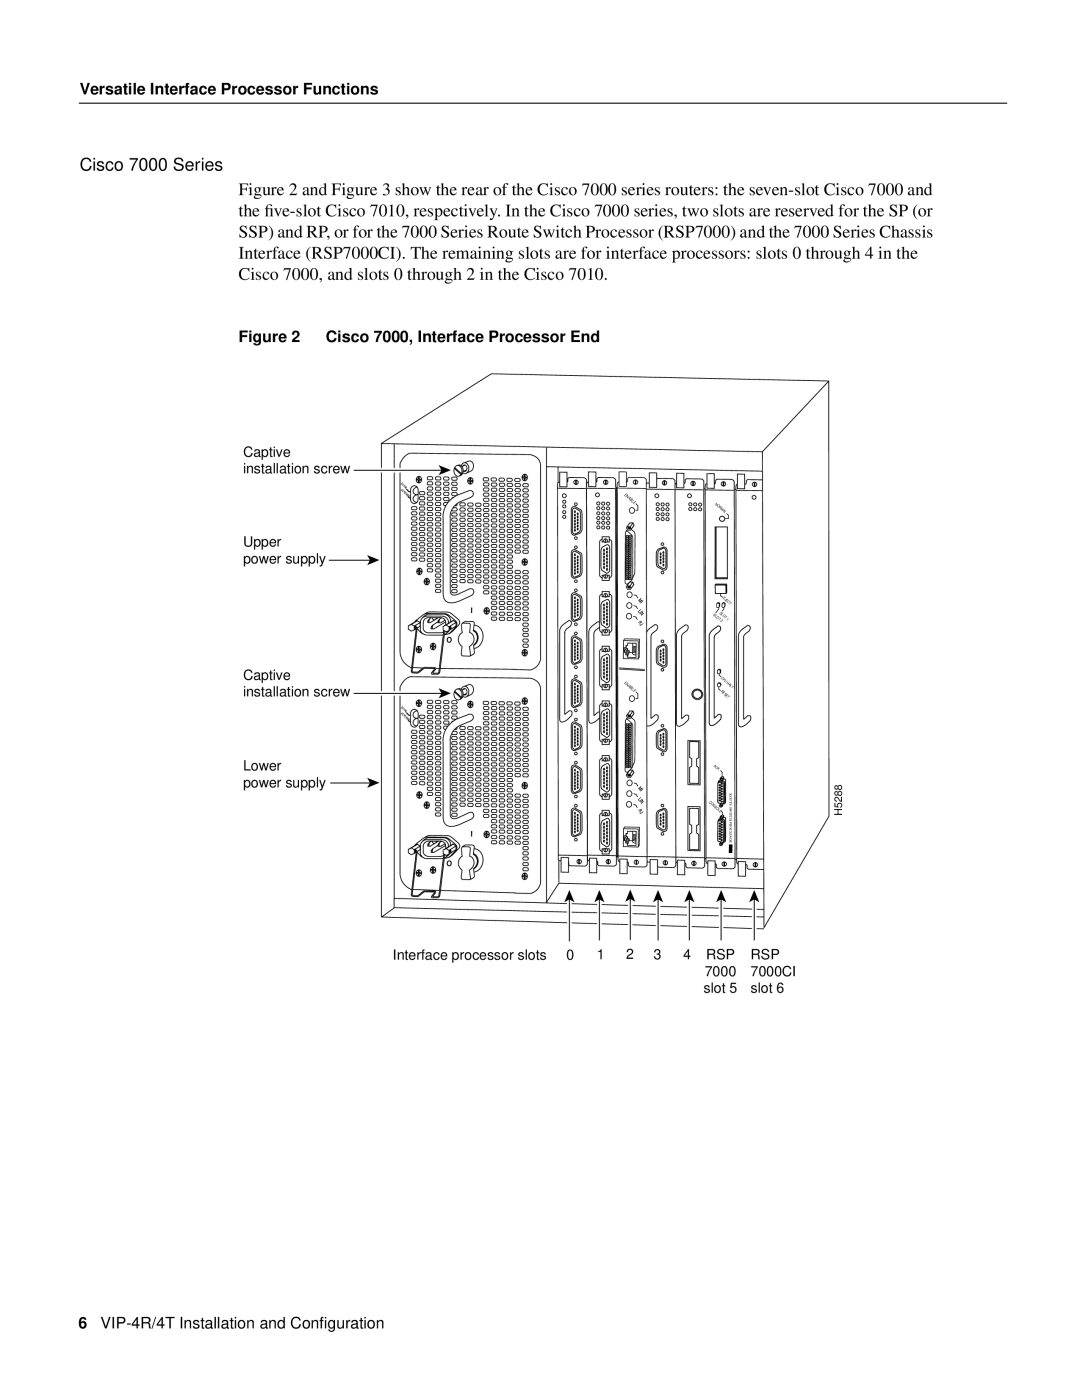 Cisco Systems manual Cisco 7000 Series, VIP-4R/4T Installation and Conﬁguration 